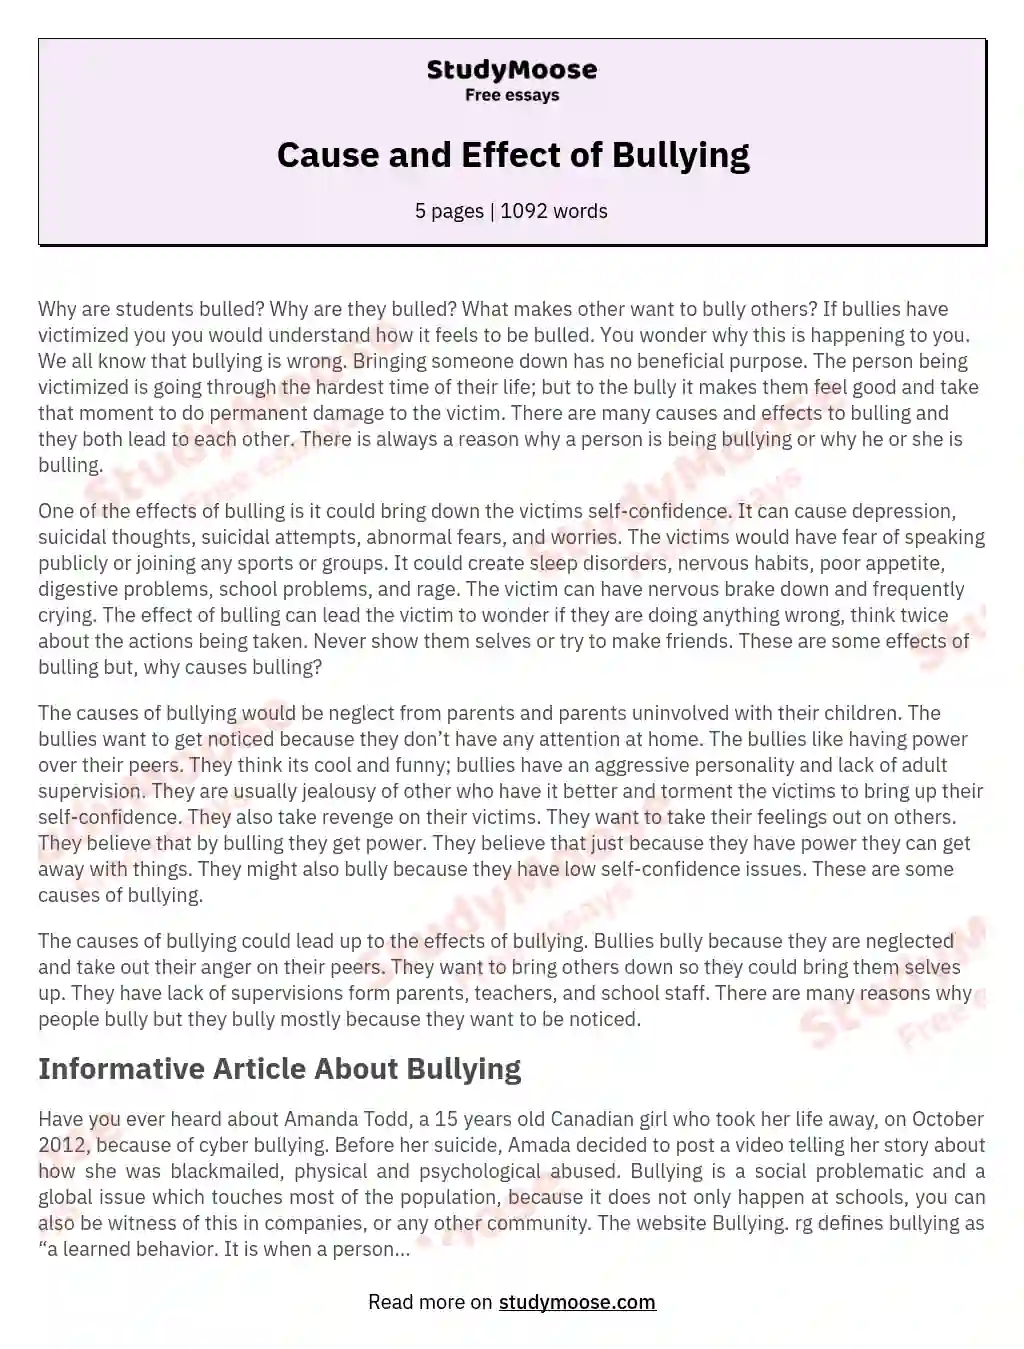 Cause and Effect of Bullying essay